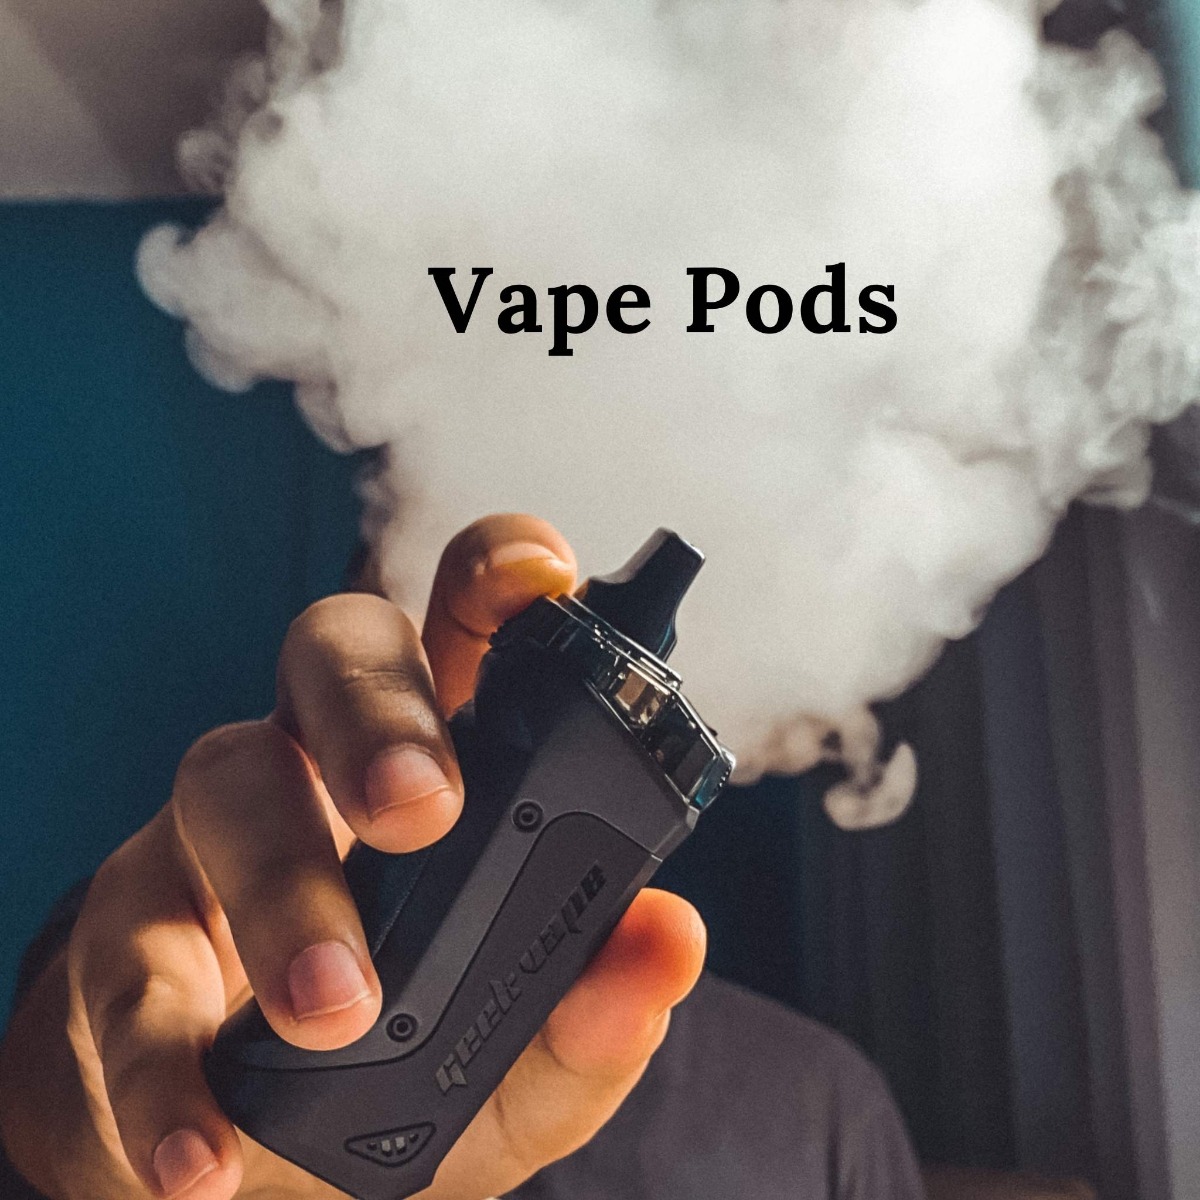 Vape being held in the middle of the image with smoke in the background 